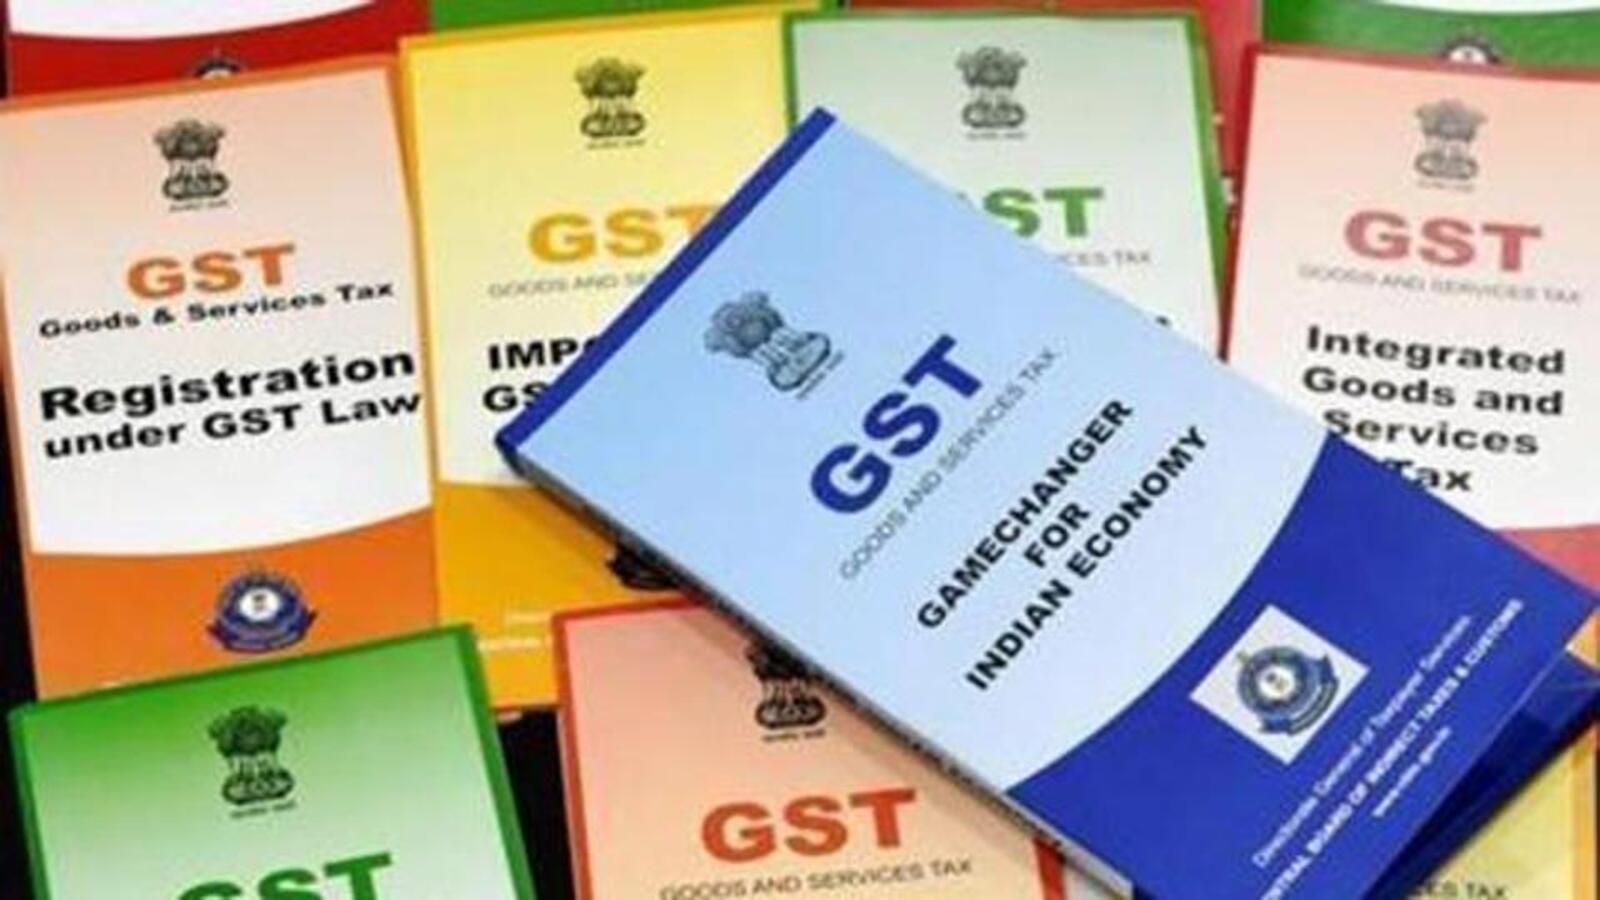 govt-grants-1-day-extension-to-file-gst-returns-due-to-technical-glitch-in-portal